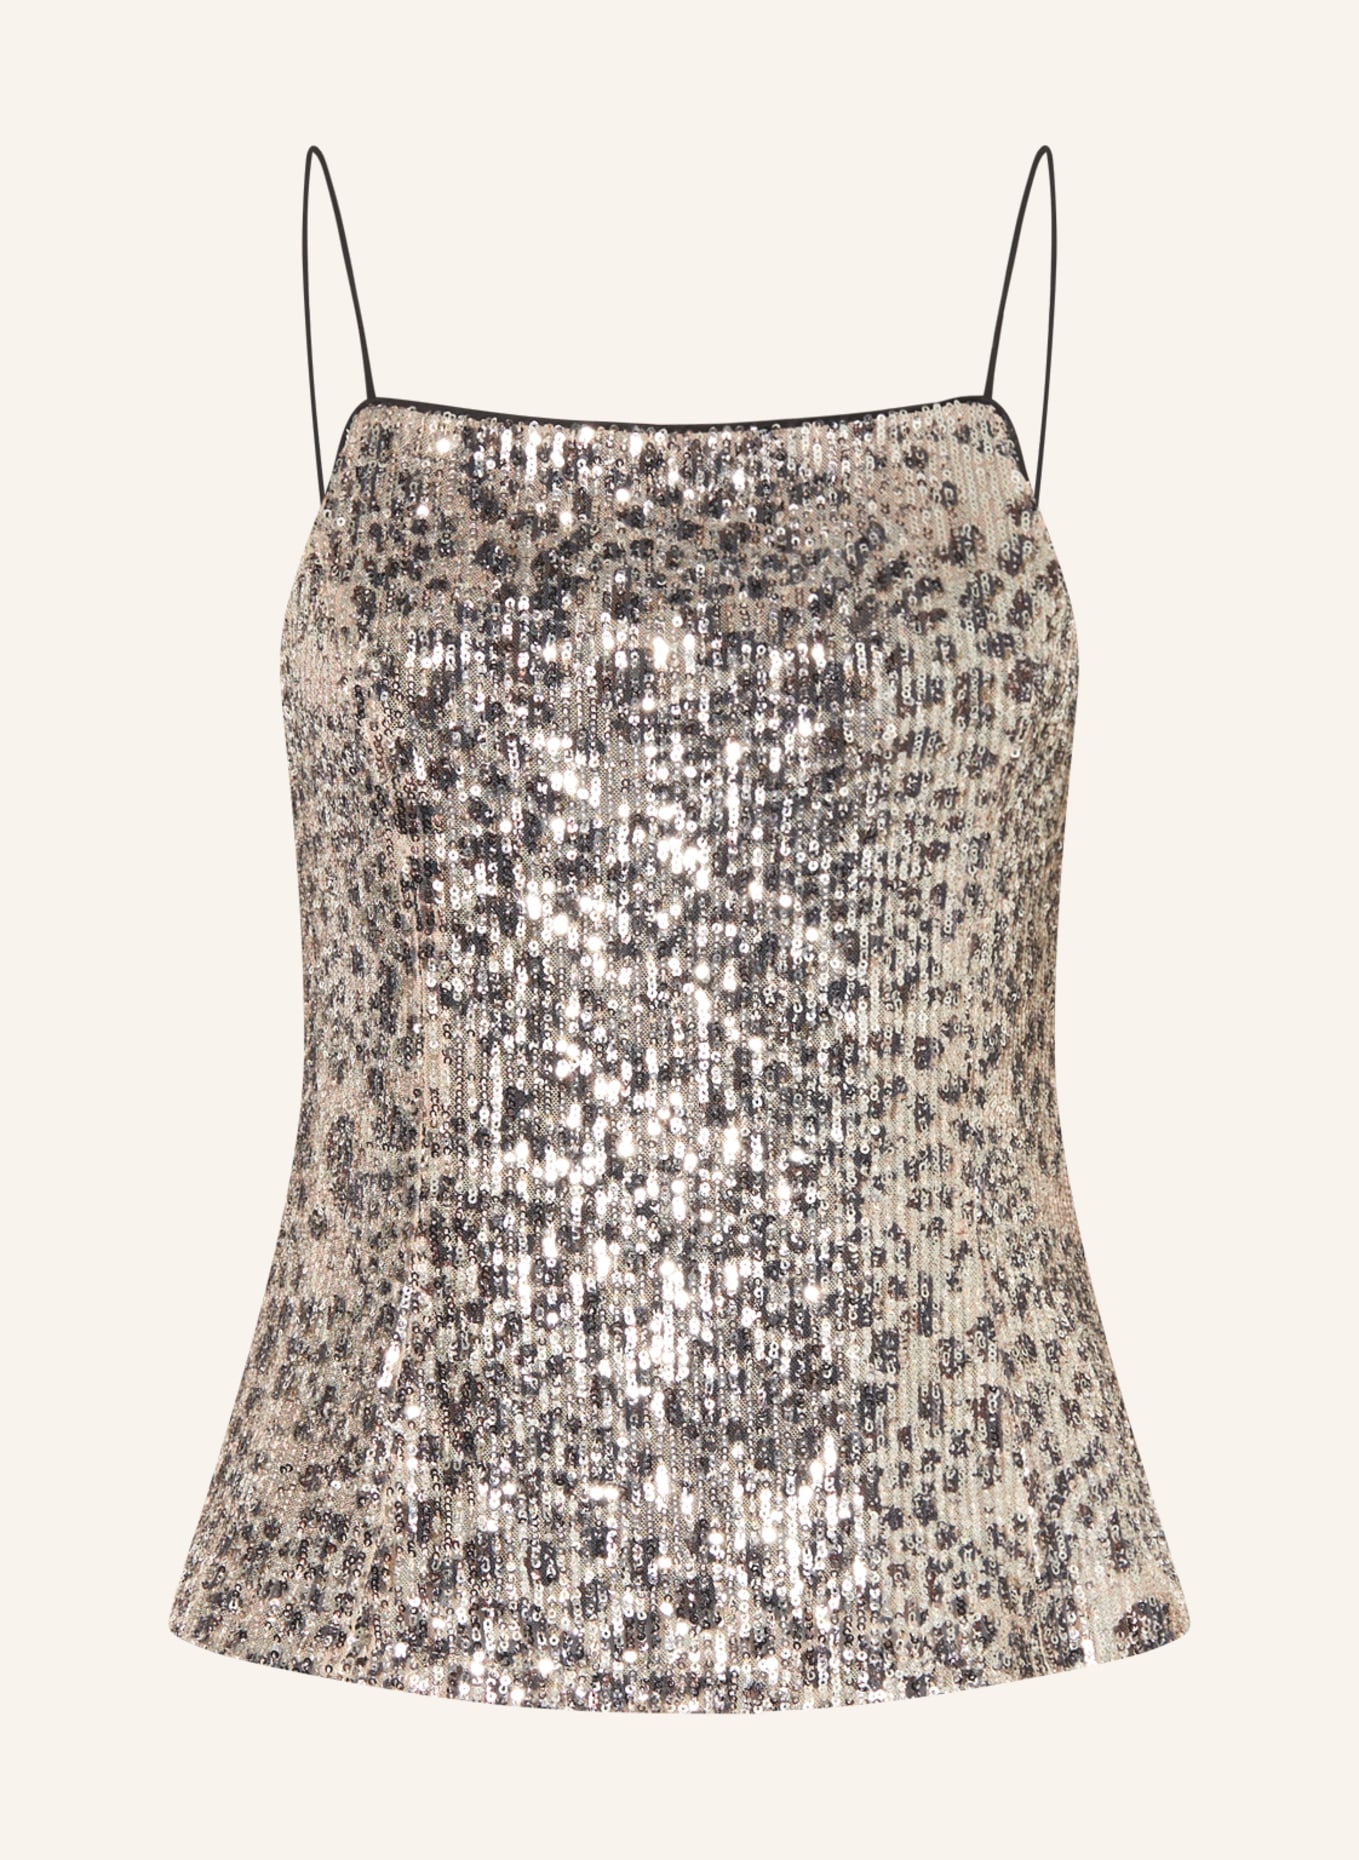 LIU JO Top with sequins, Color: GRAY/ WHITE GOLD (Image 1)